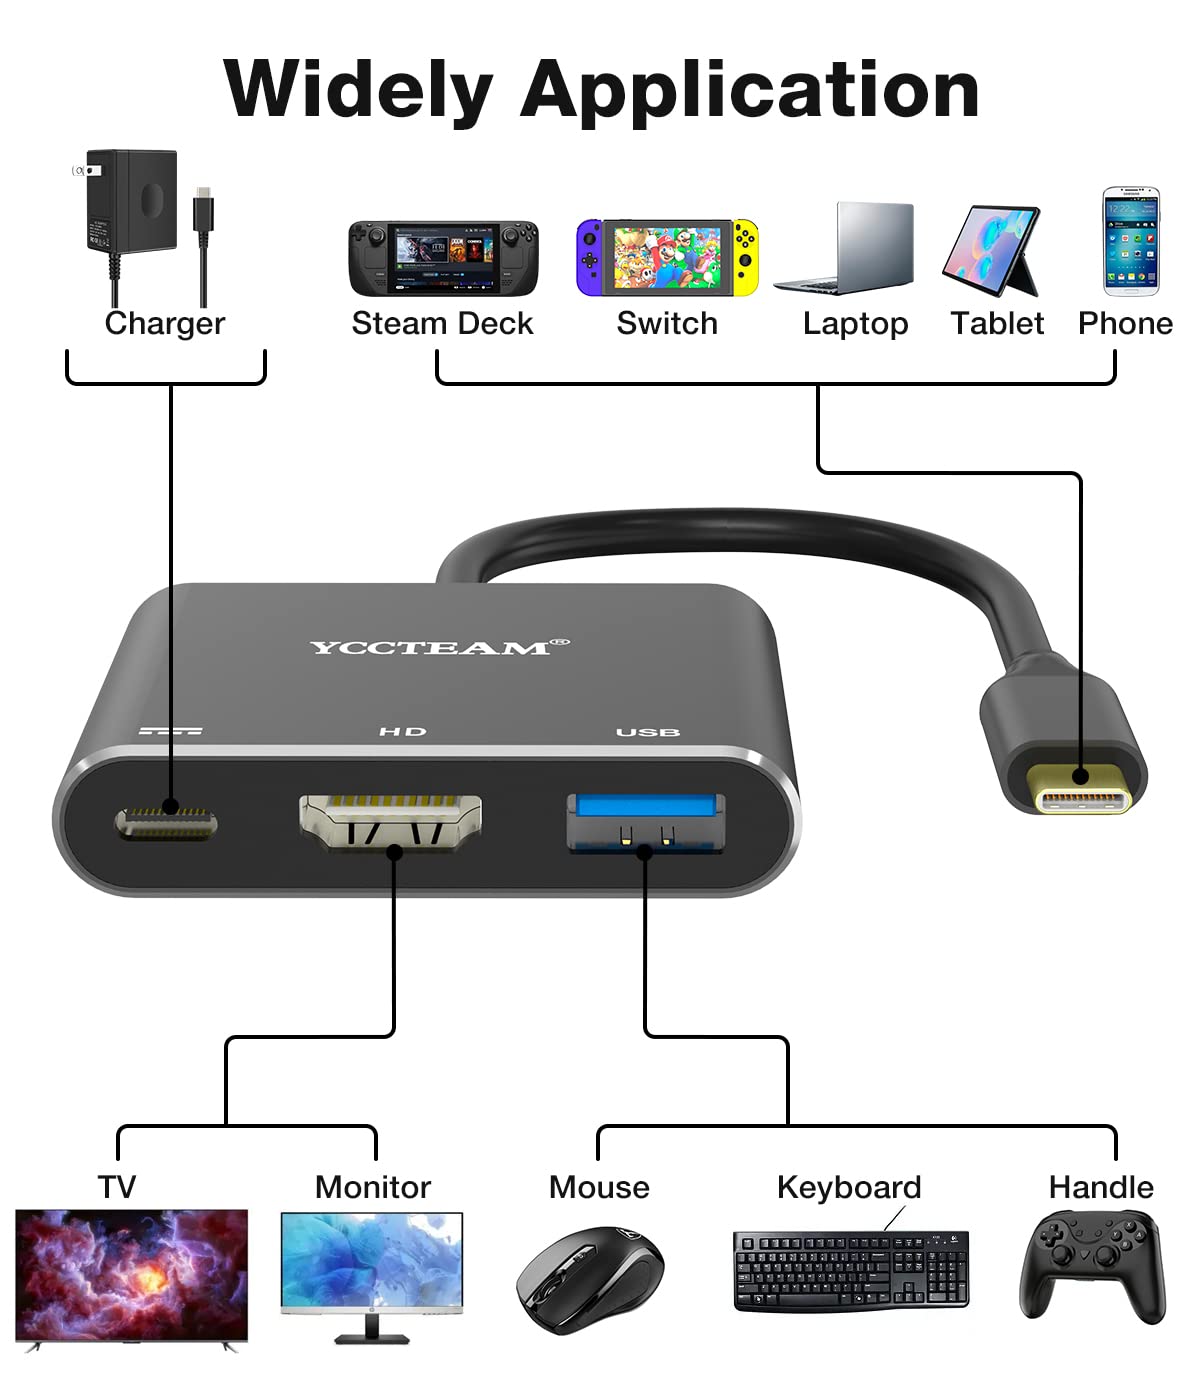 HDMI Adapter Dock for Nintendo Switch, 4K@ 60Hz TV Docking Station, Portable Switch Dock, Compatible with Screen Projection and Charging Functions (as NS/PC/Android/Samsung/MacBook)